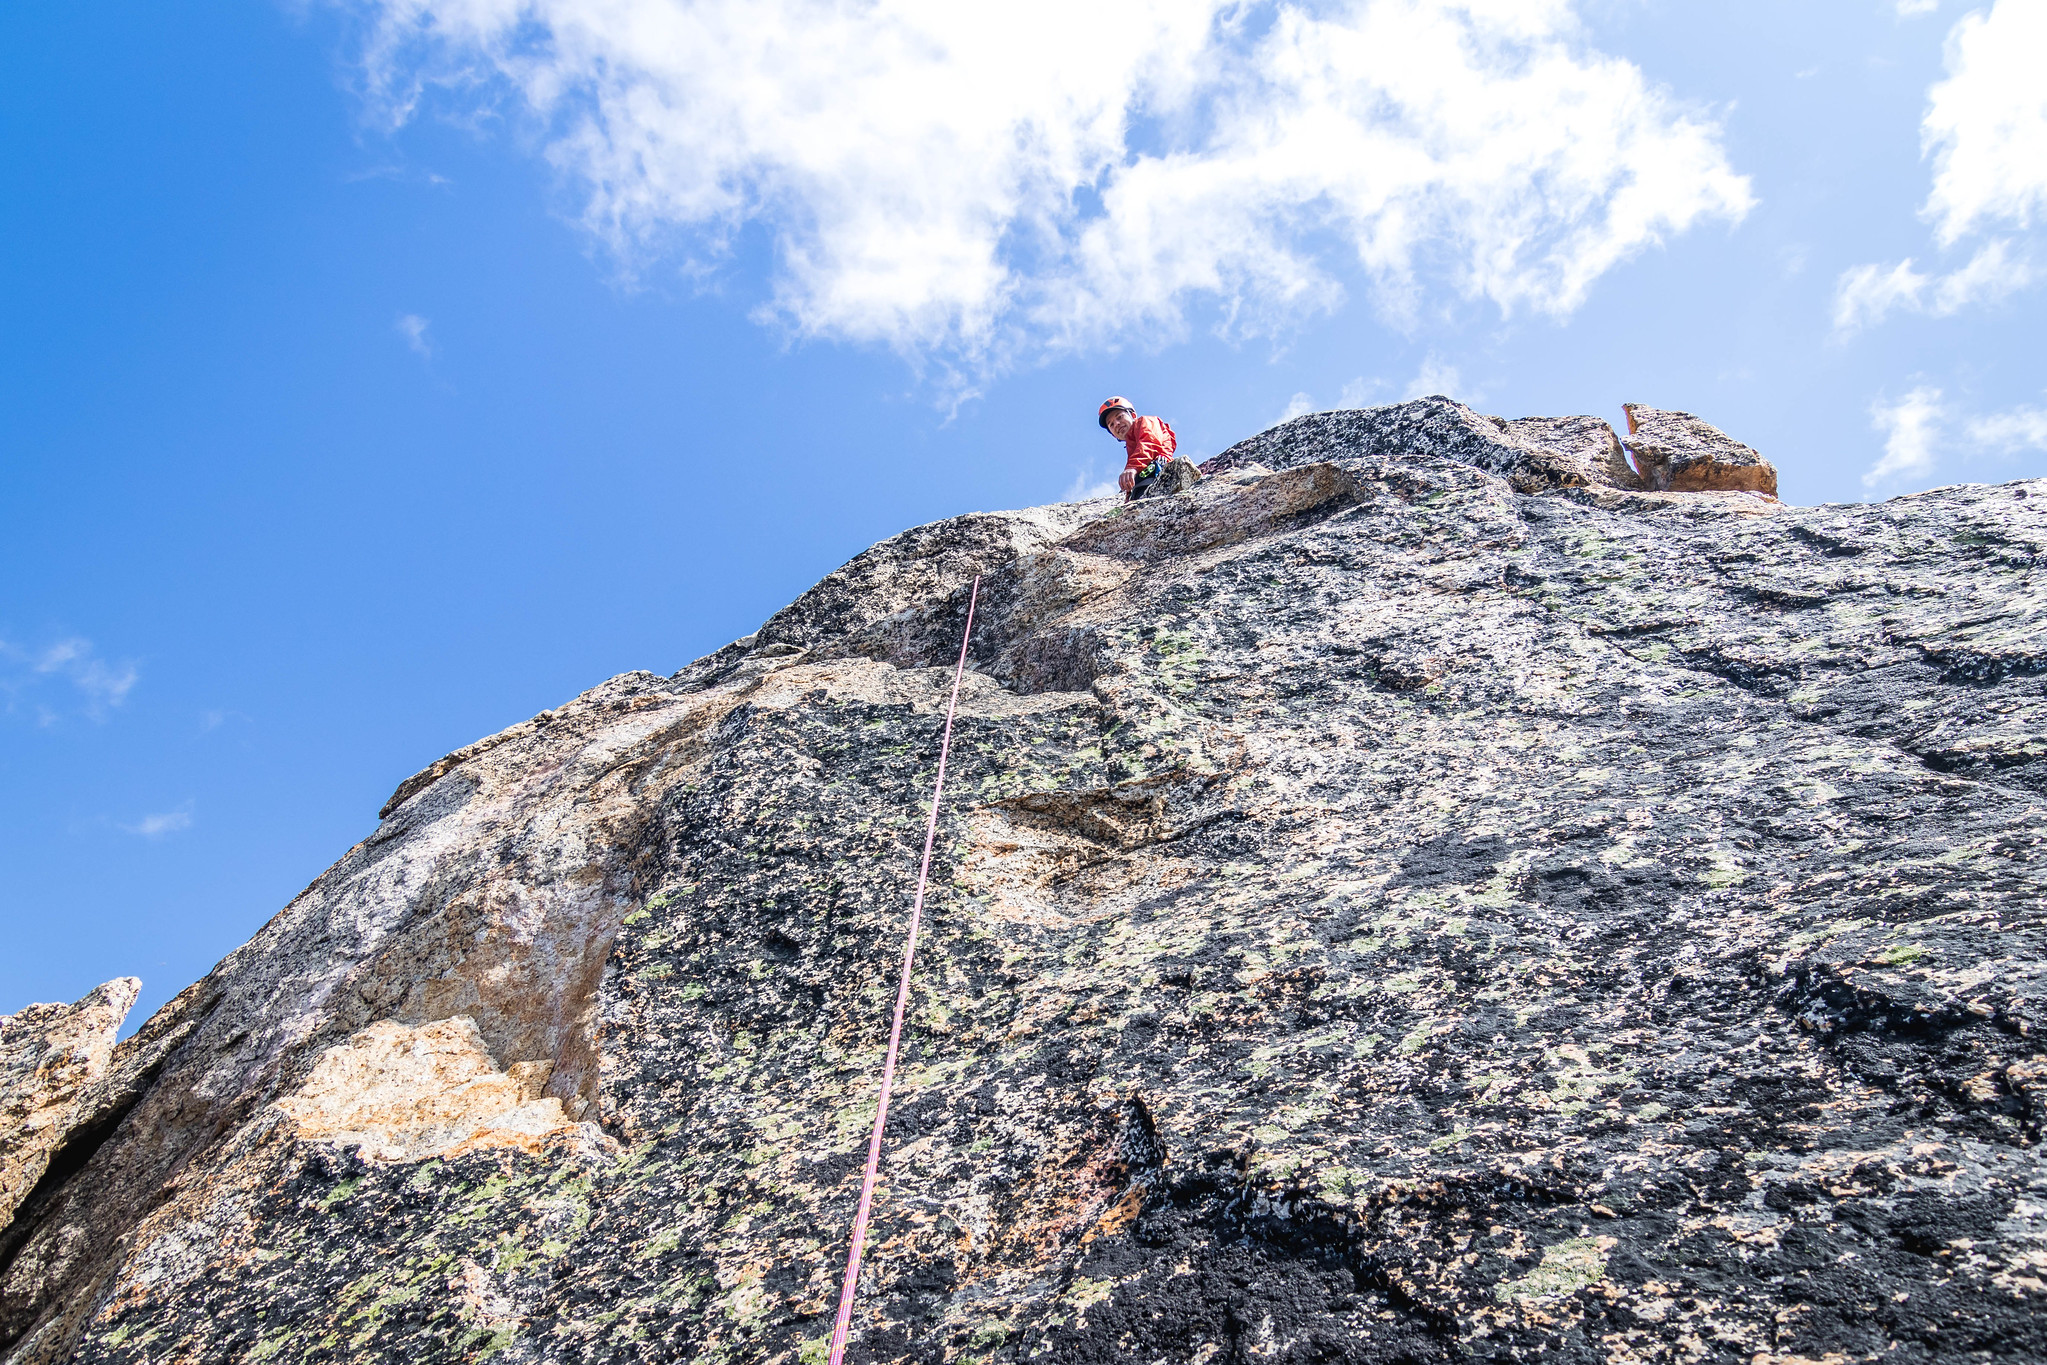 Belaying from the summit